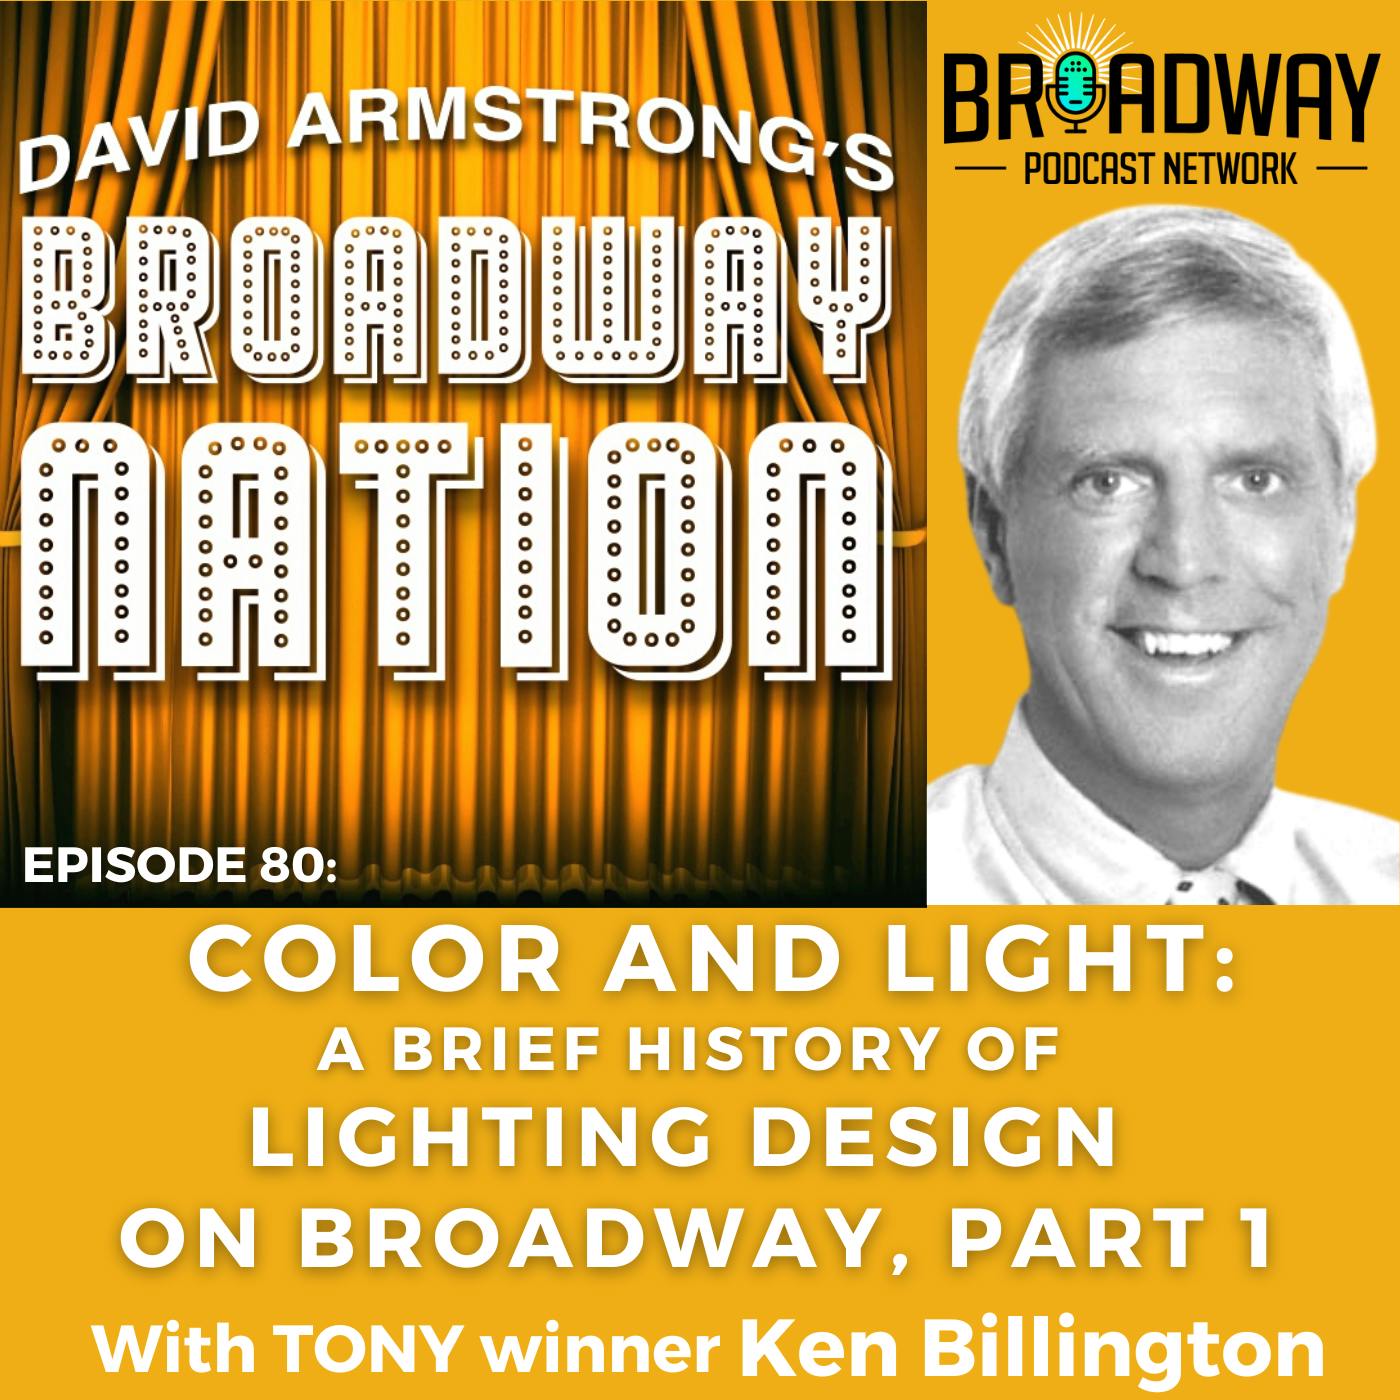 Episode 80: COLOR AND LIGHT: A Brief History of Broadway Lighting Design Image